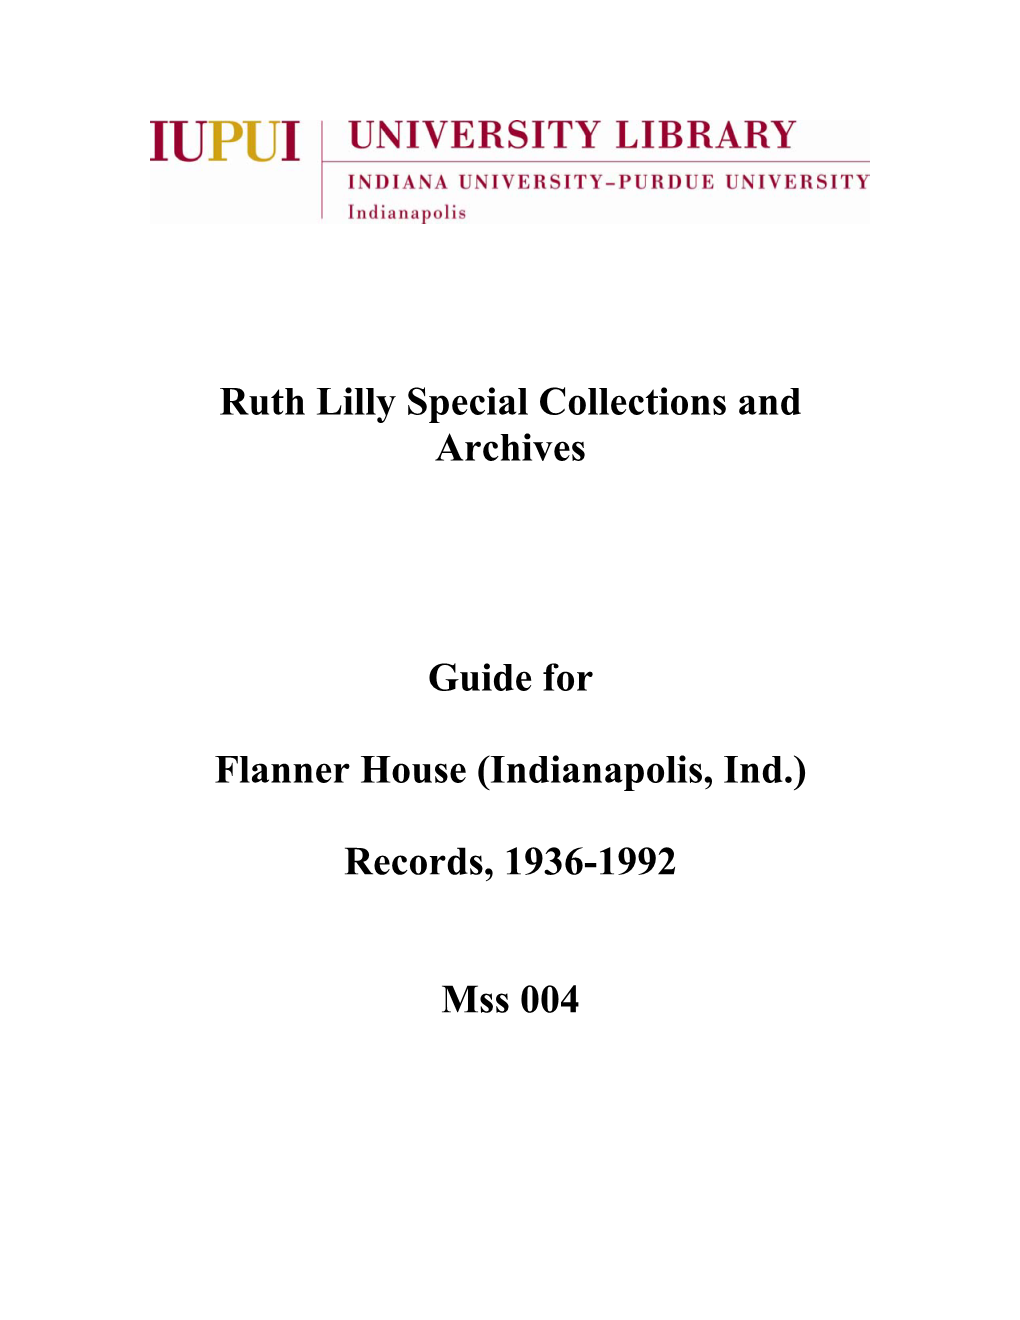 Ruth Lilly Special Collections and Archives Guide for Flanner House